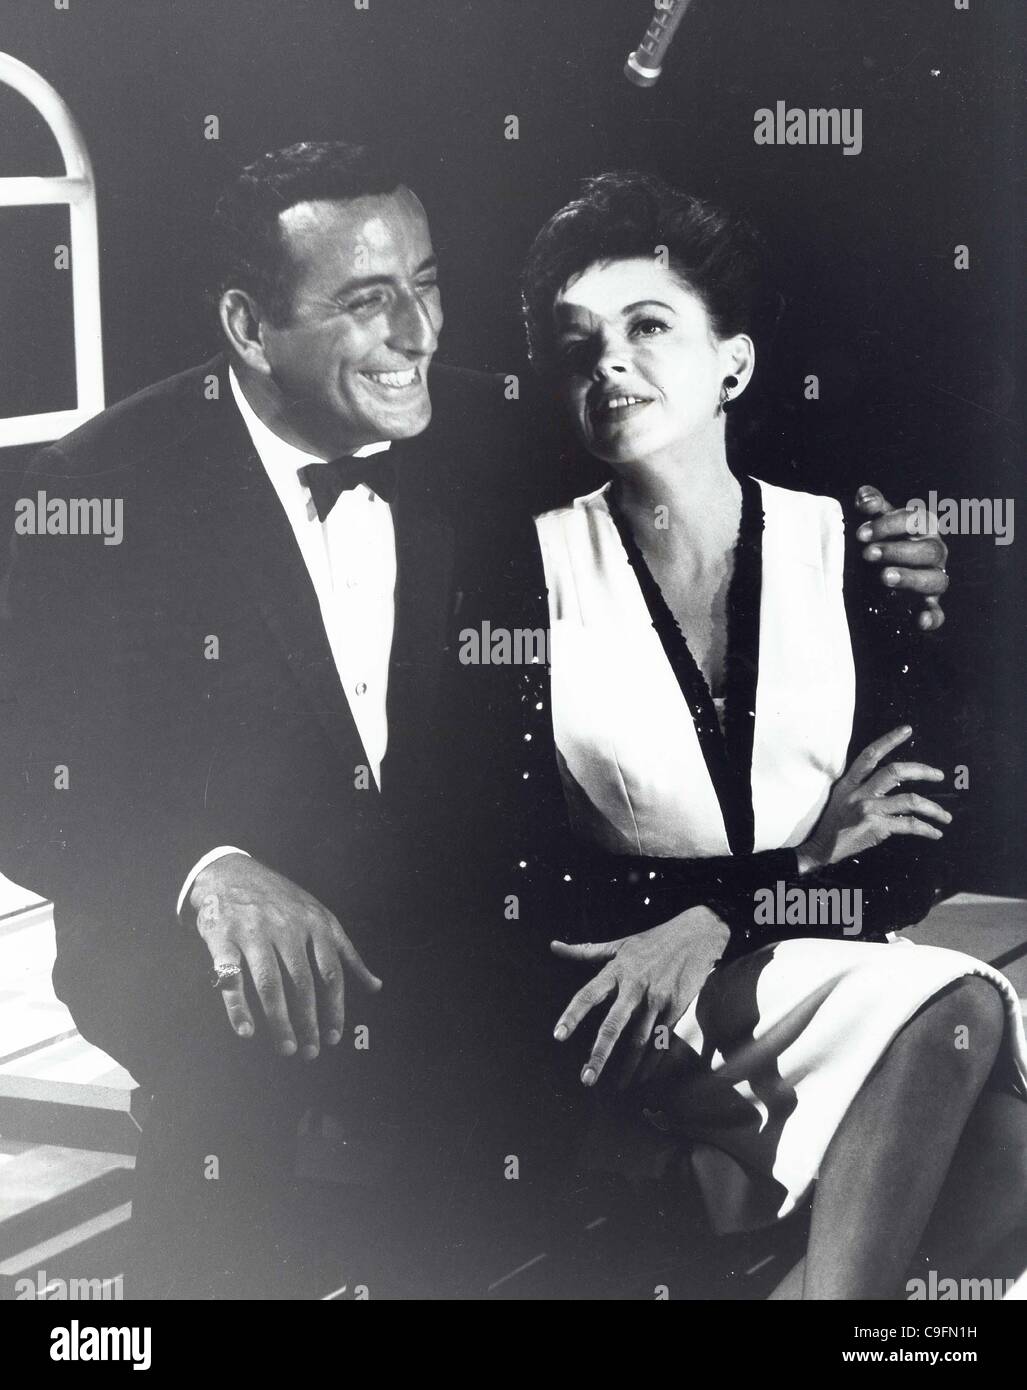 Details about  / Tony Bennett Here/'s to the Ladies Promo LP Record Photo Flat 12x12 Poster